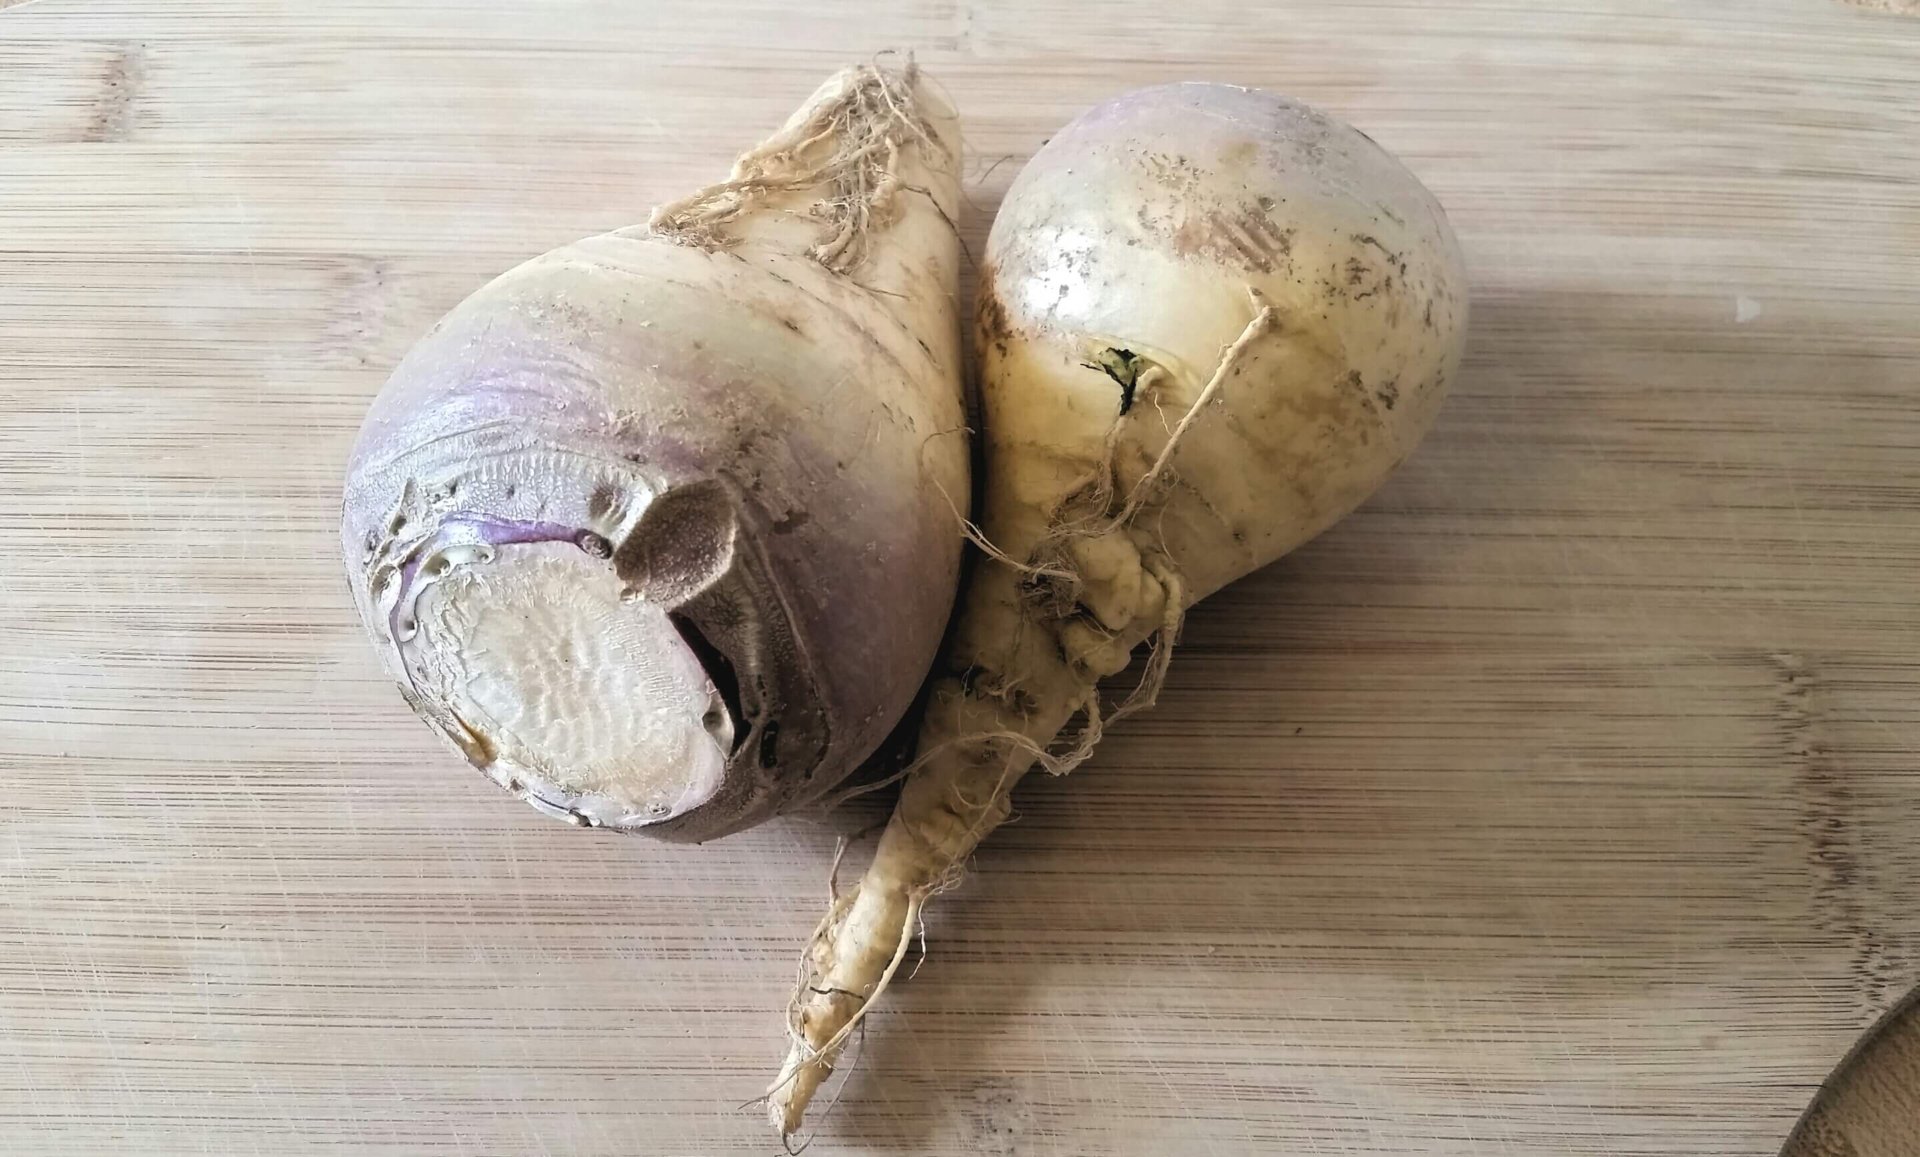 the-abc-list-of-the-healthiest-vegetables-r-for-rutabaga-50-friendly